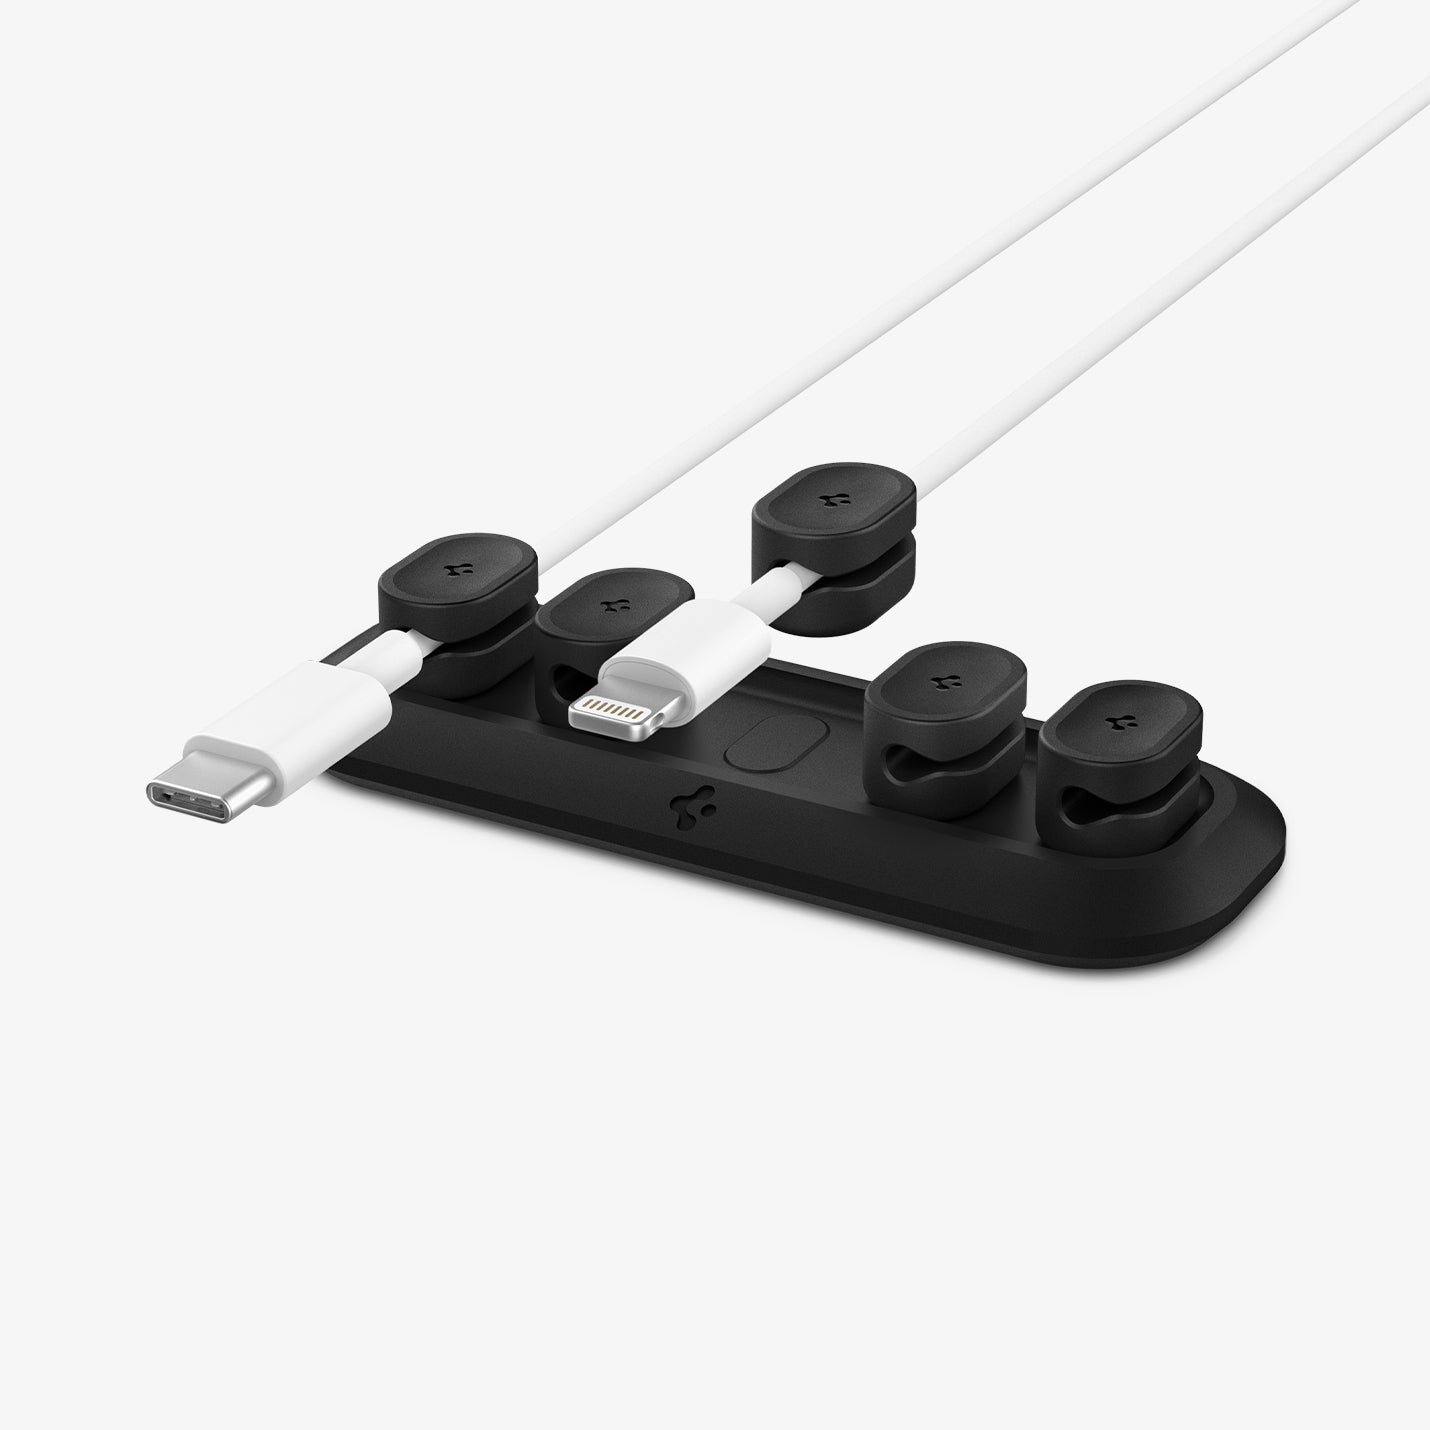 ACA04604 - LD101 Magnetic Cable Holder in black showing magnetic base with 4 cable holders and two cables using the holders with 1 hovering above base